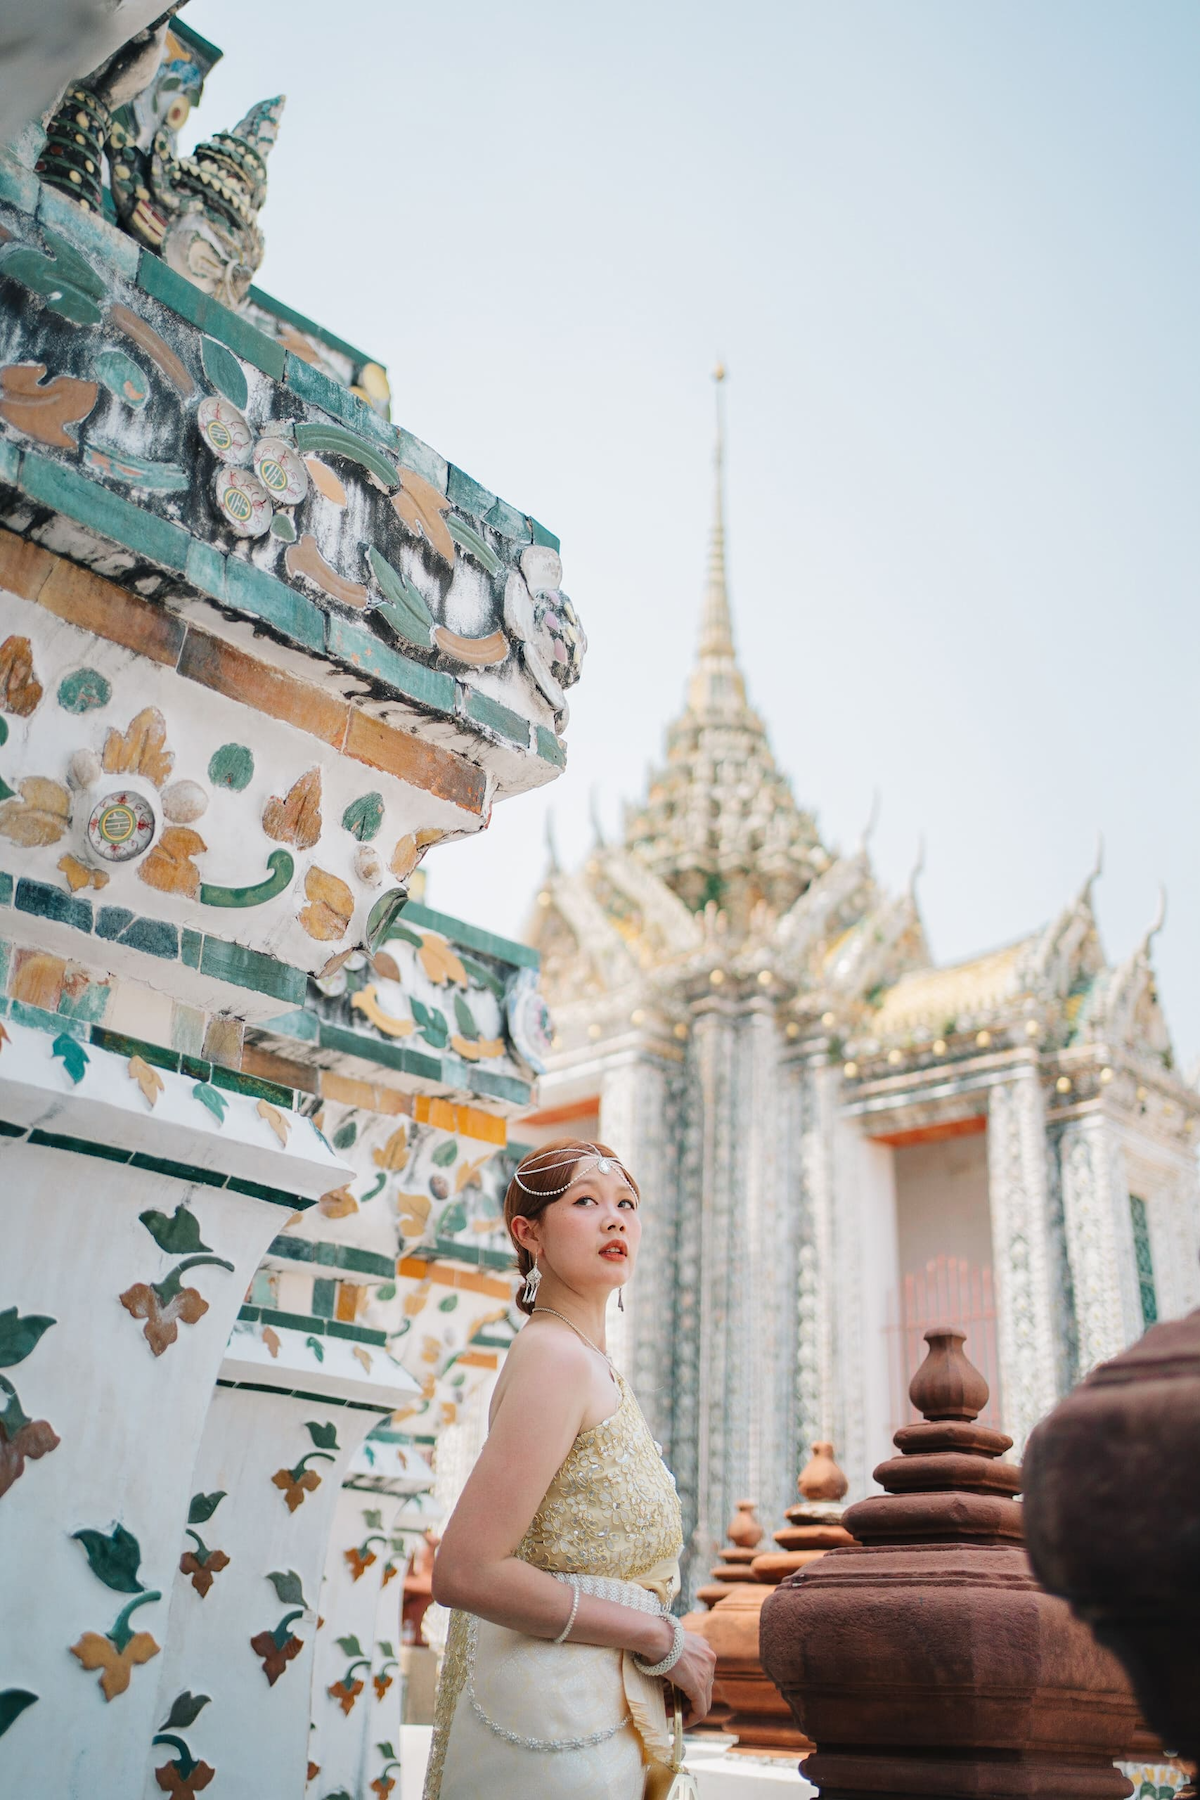 Woman wearing traditional Thai outfit standing amidst and looking up at the tall temple structures